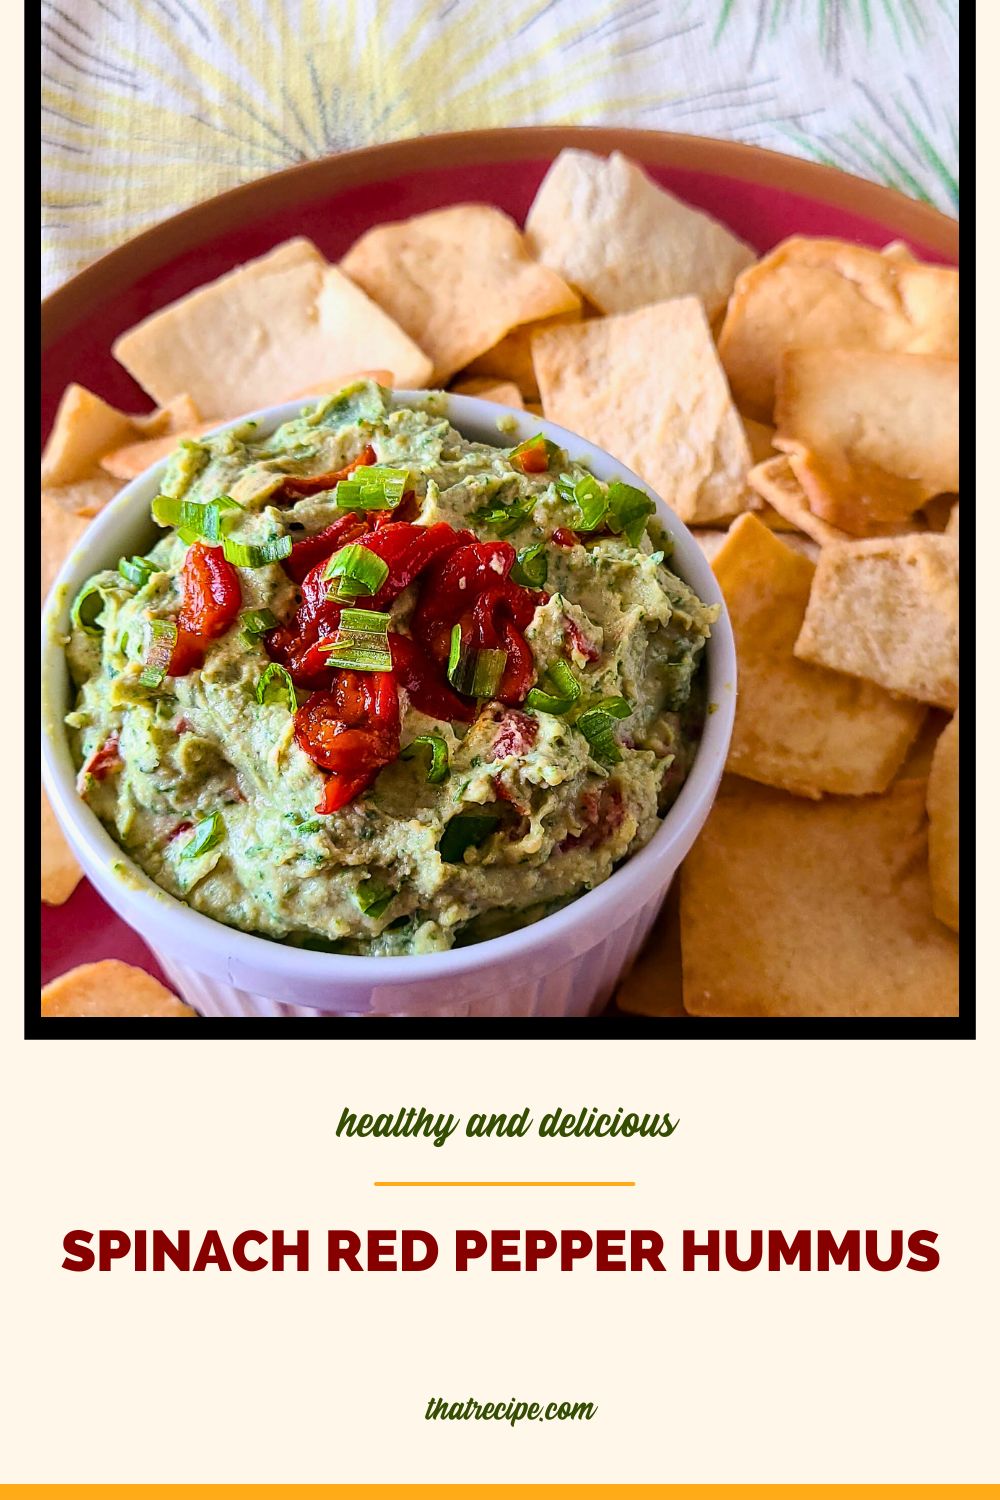 green and red hummus in a bowl with pita chips and text overlay "spinach and red pepper hummus"